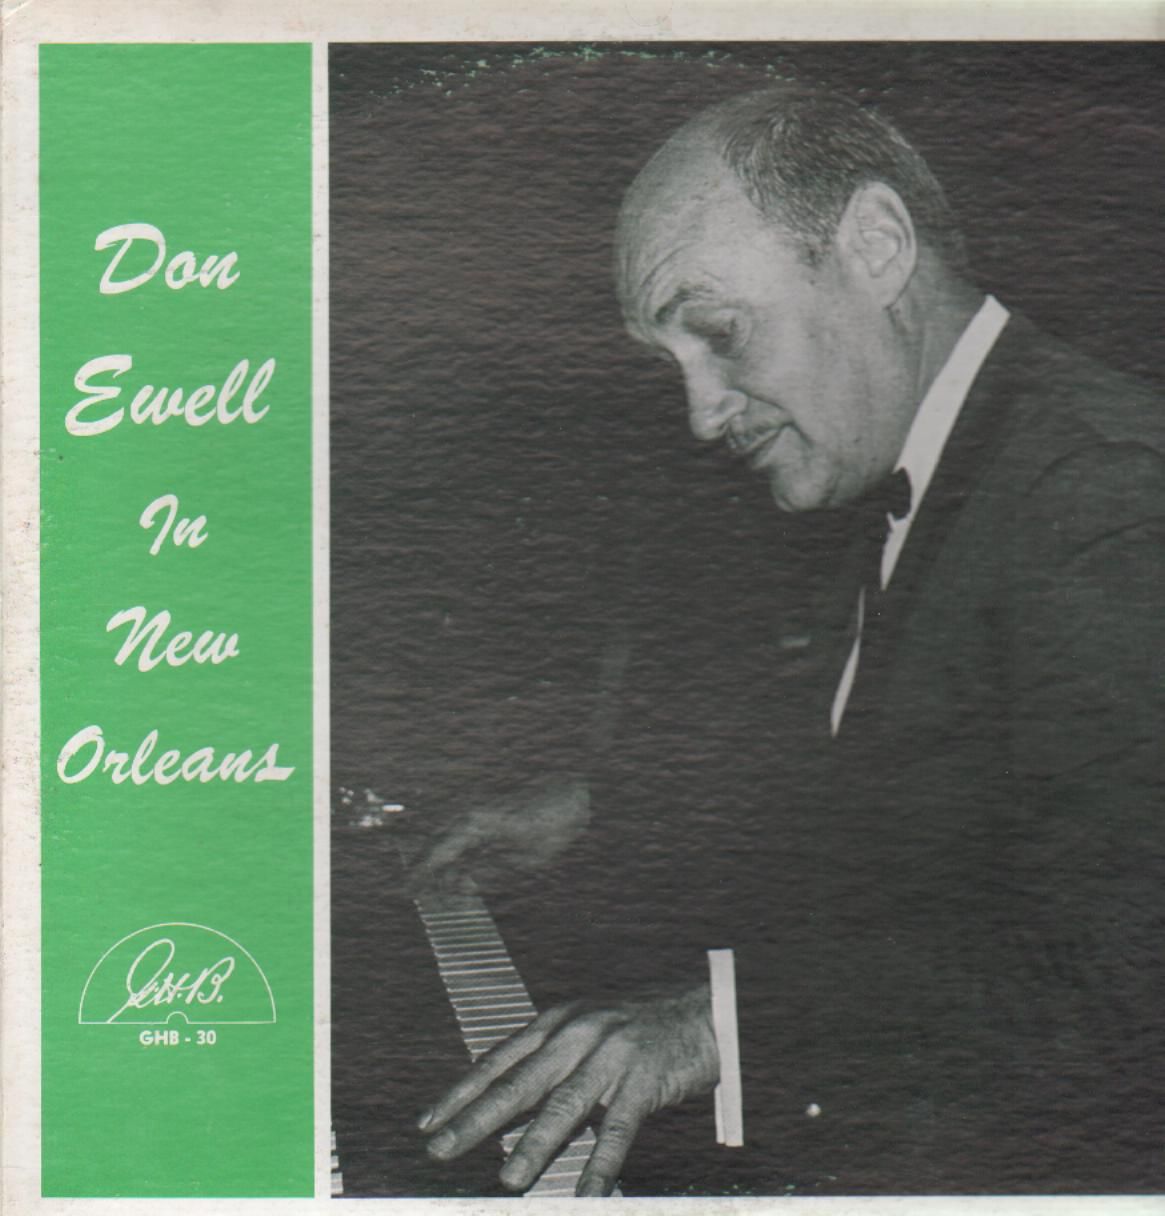 DON EWELL - In New Orleans cover 